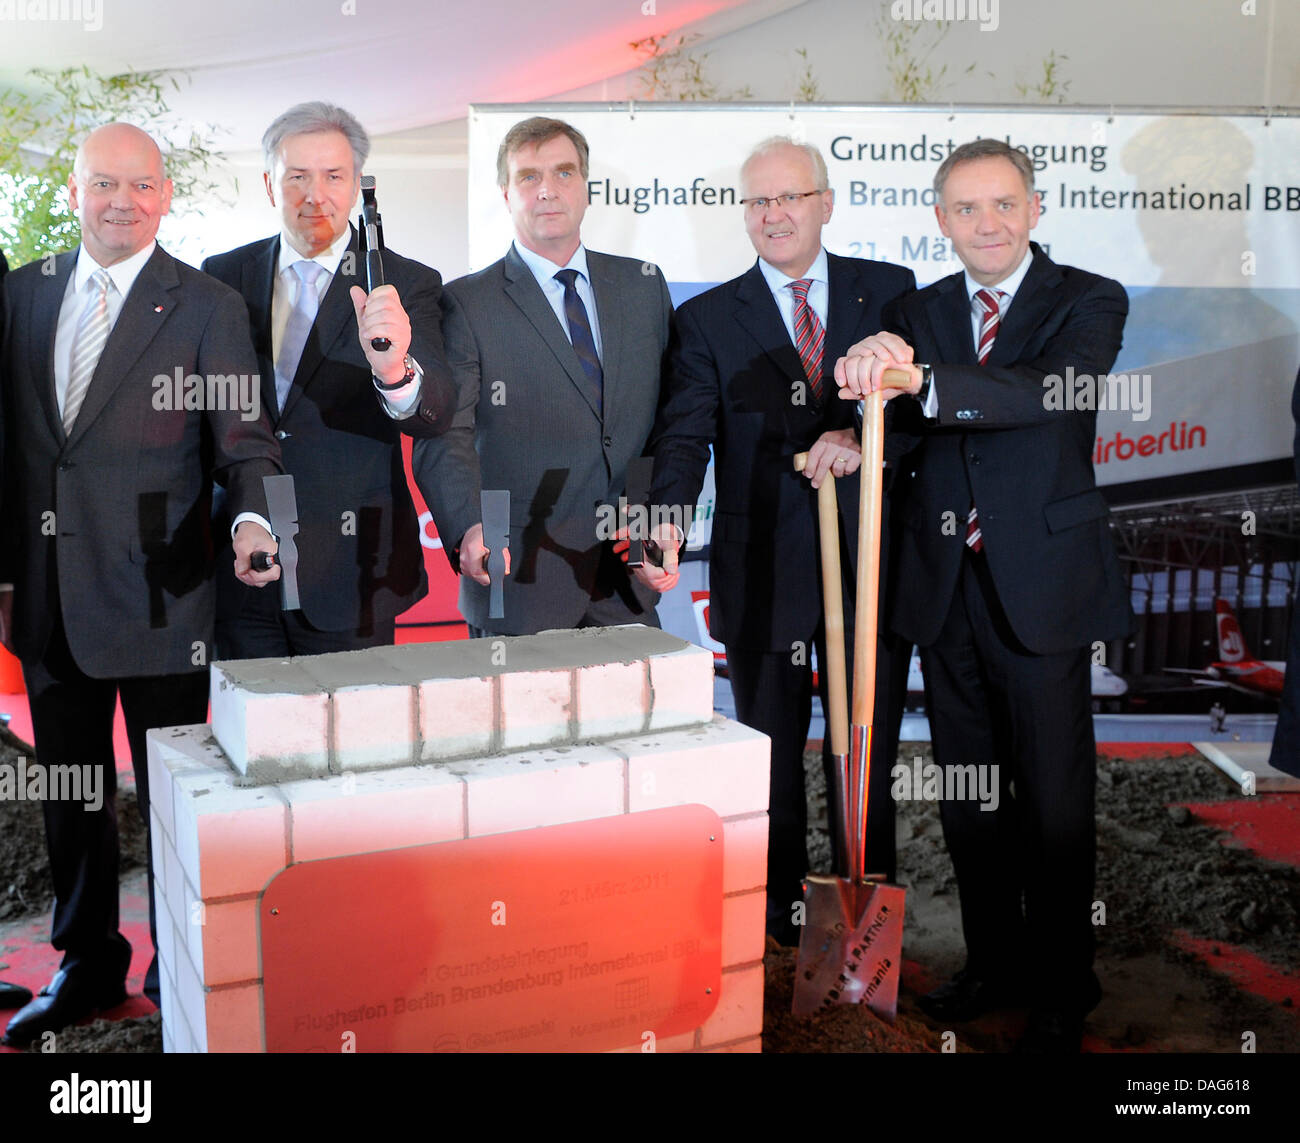 (L to R:) Air Berlin CEO Joachim Hunold, Berlin Mayor Klaus Wowereit, Brandenburg's Economy Minister Ralf Christoffers and BBI managing director Manfred A. Koertgen lay down the foundational stone for a new Air Berlin hangar at Berlin-Brandenburg International Airport (BBI), which is still under construction in Schoenefeld, Germany, 21 March 2011. The new hangar can accomodate six  Stock Photo